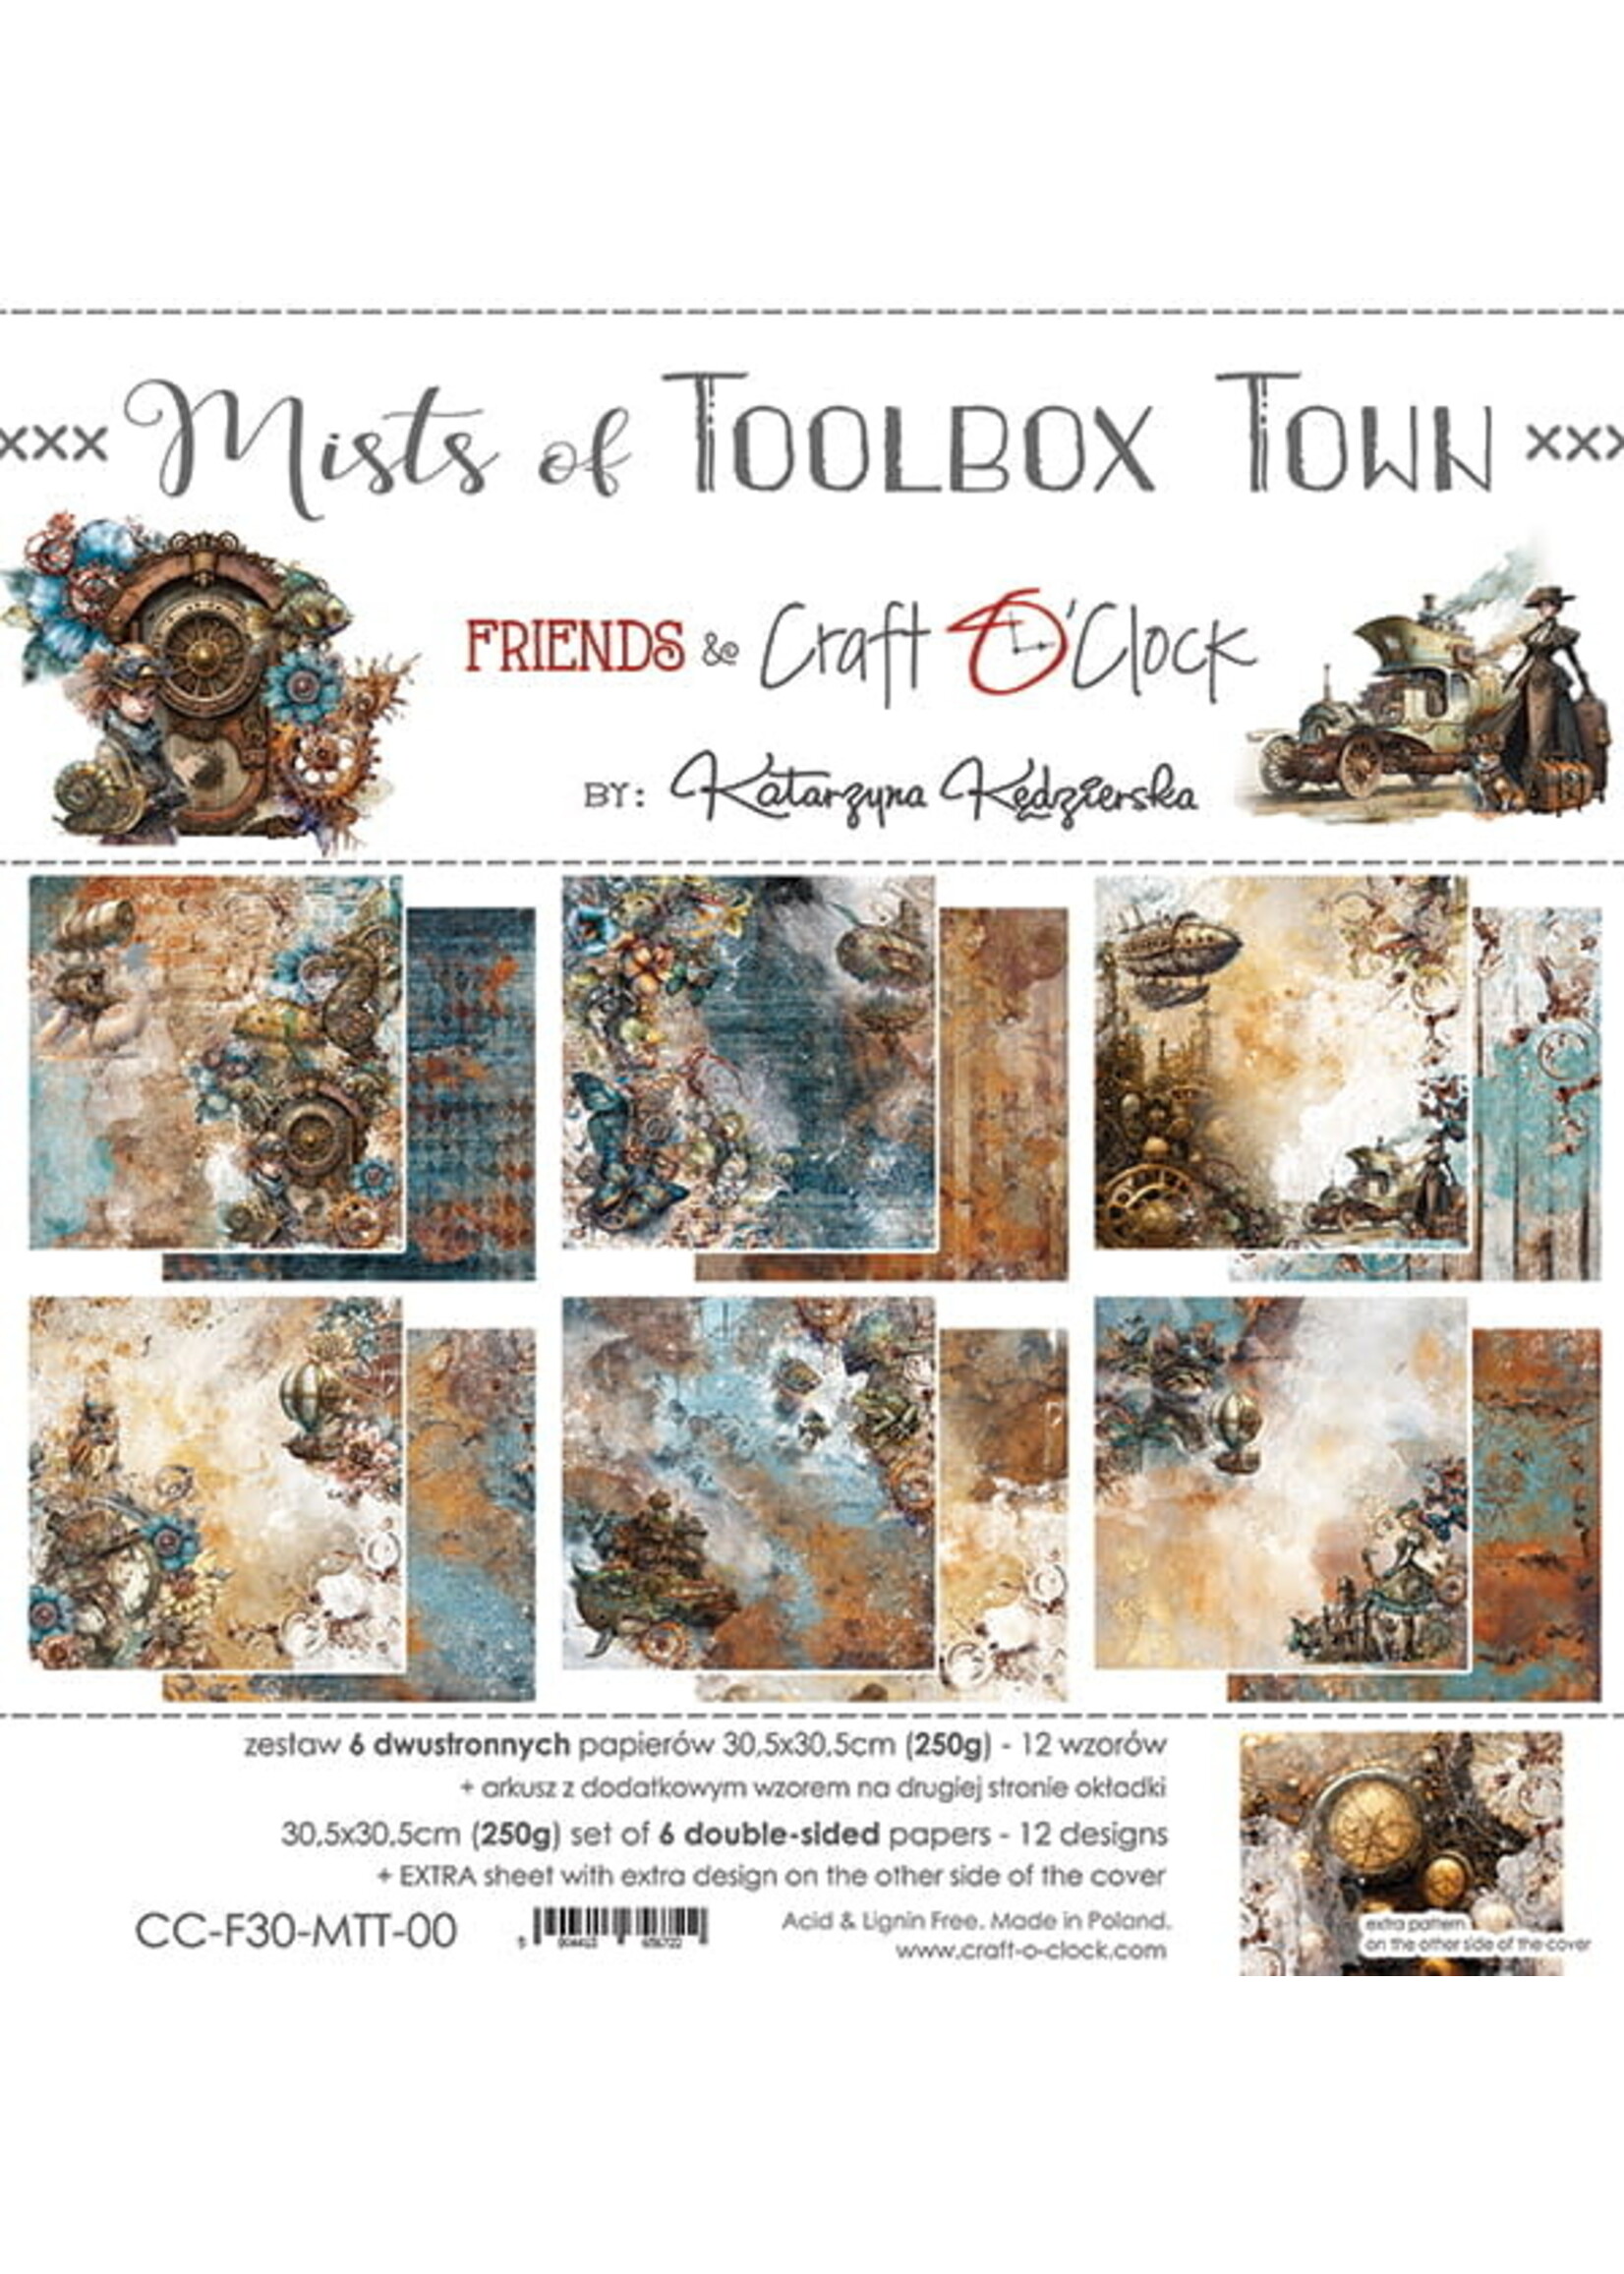 Craft O Clock MISTS OF TOOLBOX TOWN - A SET OF PAPERS 30,5X30,5CM